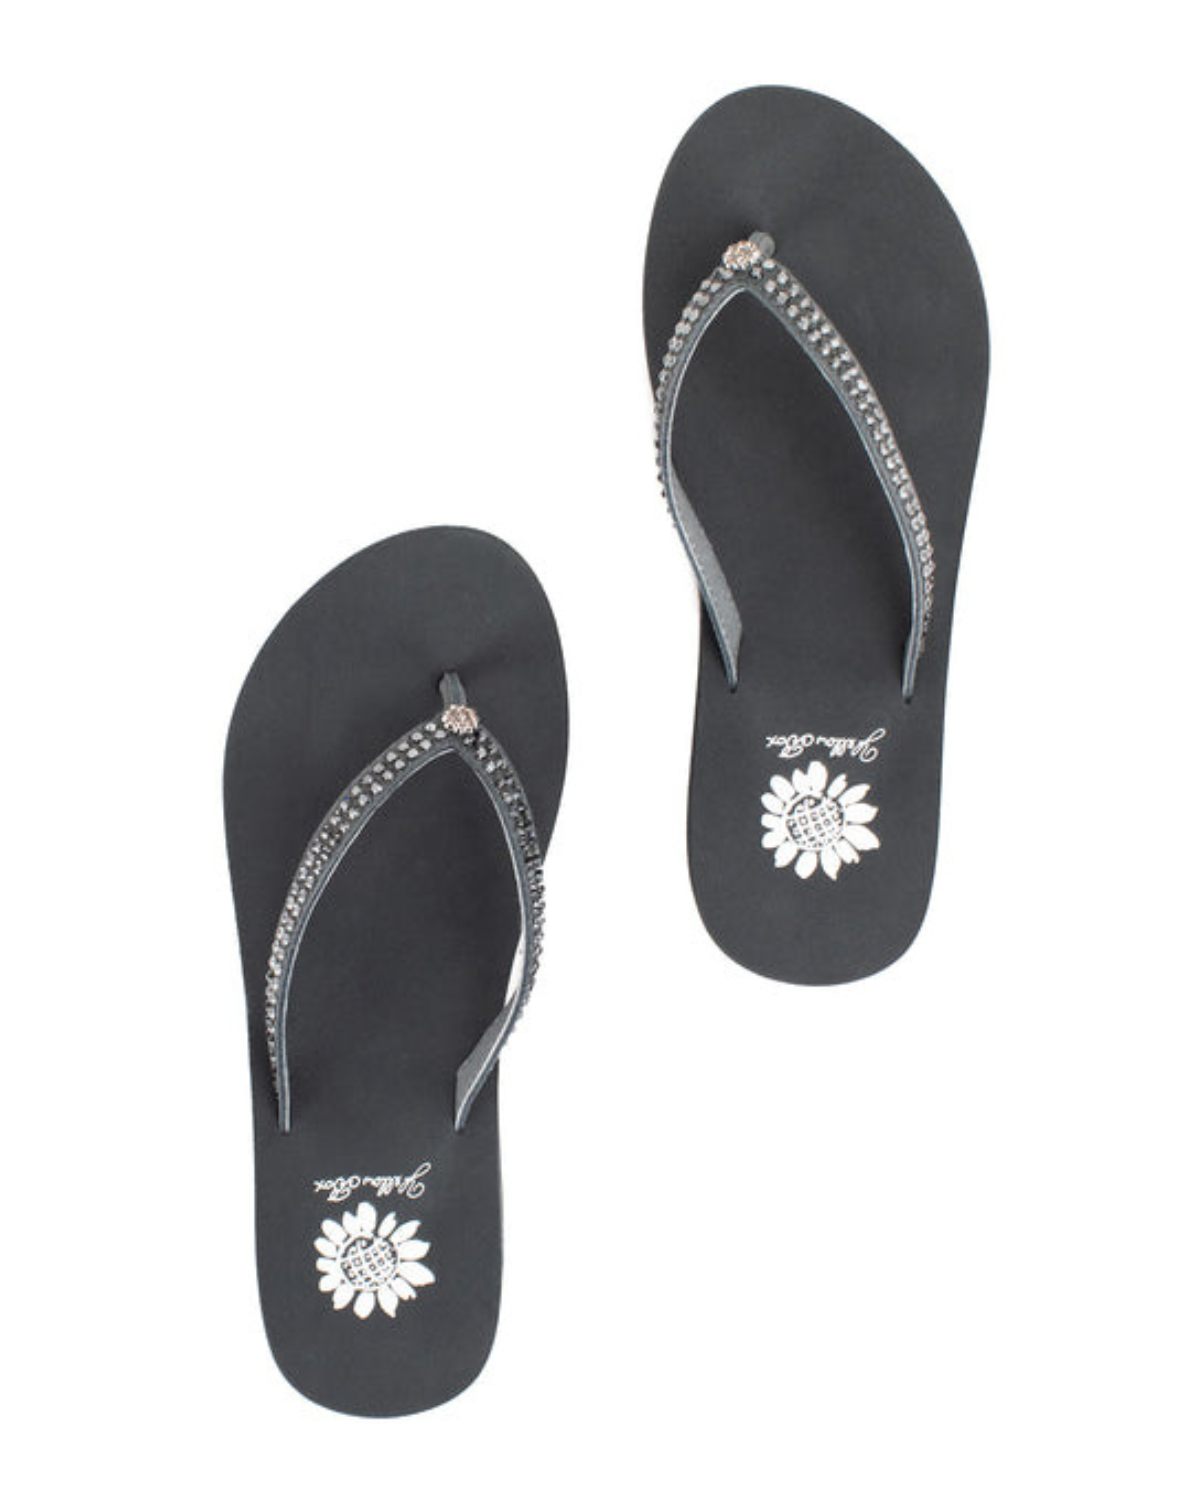 Top view of a pair of grey wedge sandals with rhinestones on the strap on a white backdrop. The sandal has 1.75" heel height and 0.75" platform height.